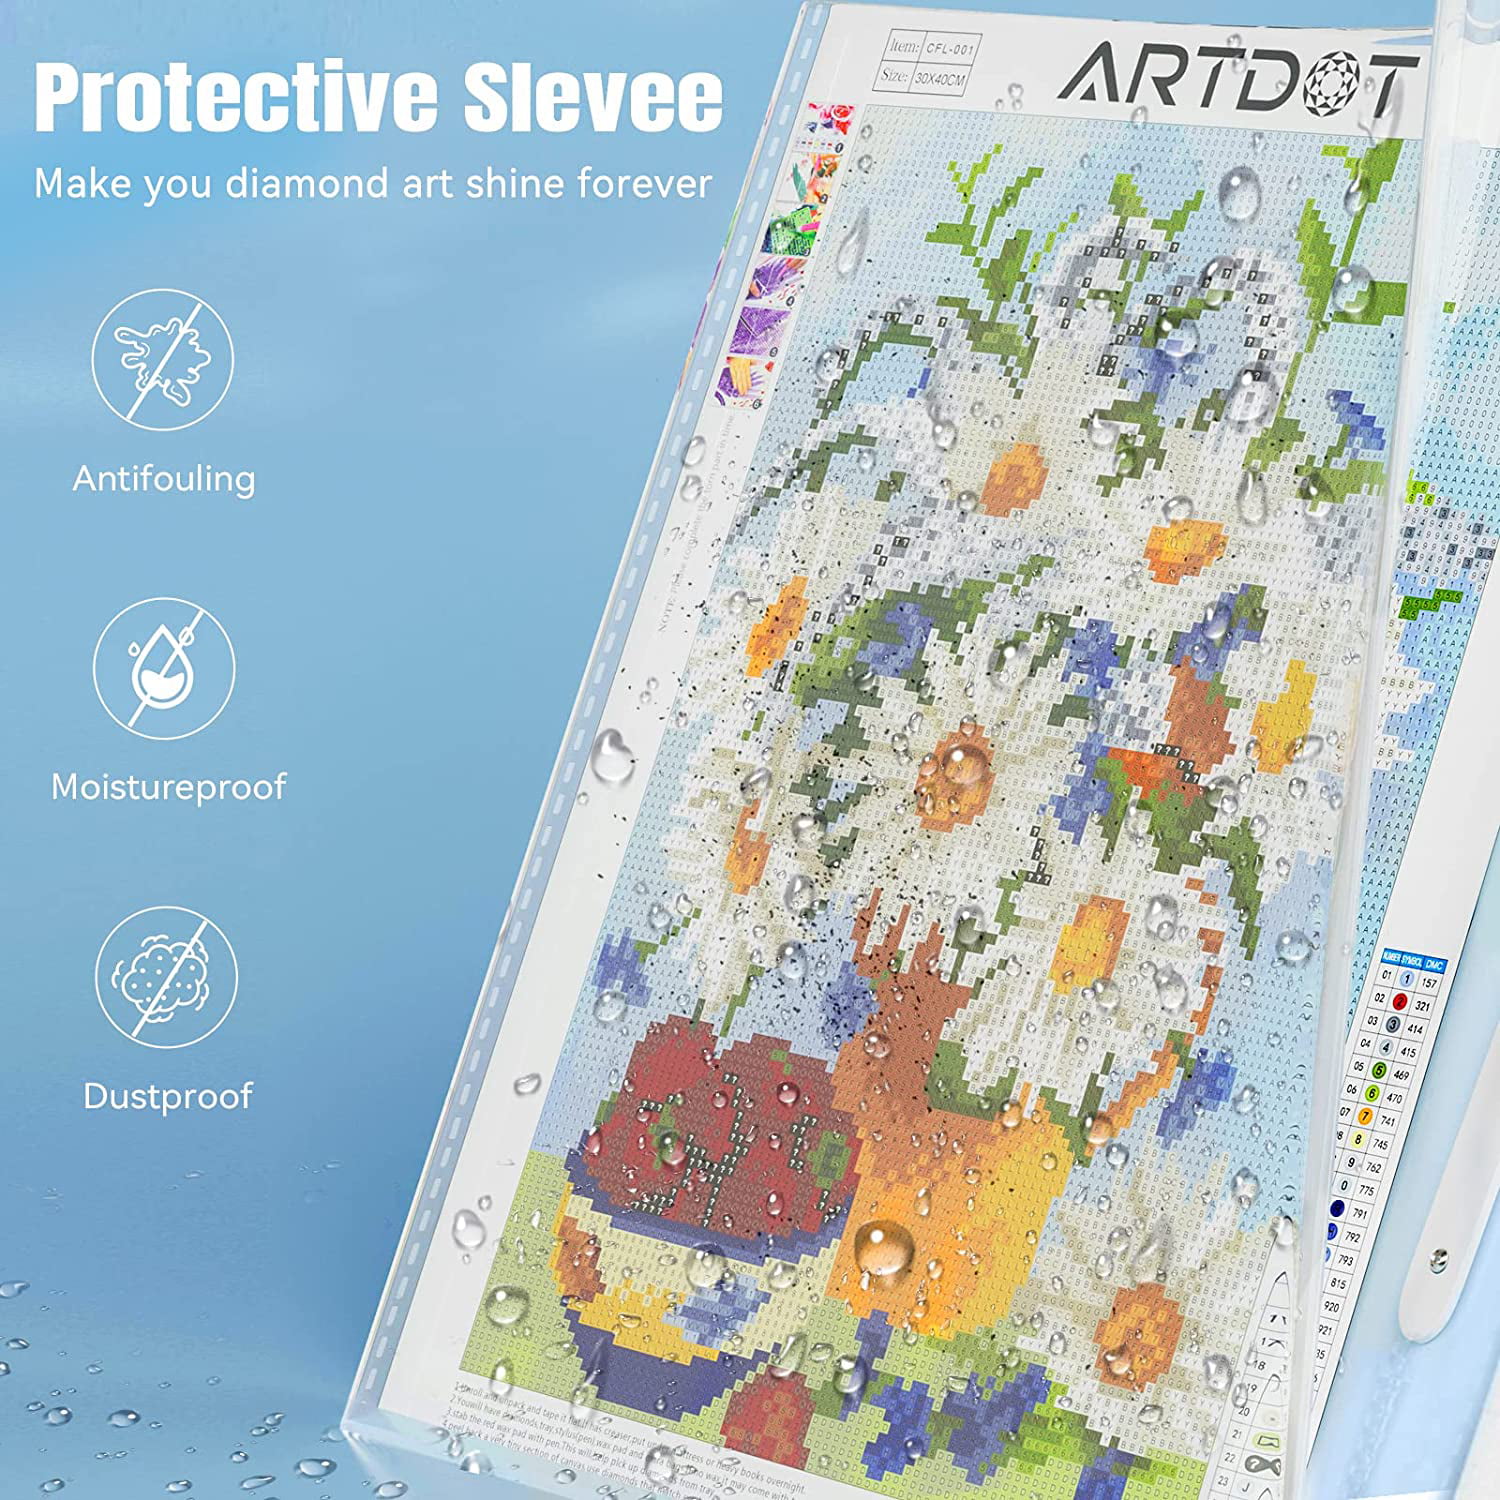 ARTDOT A3 Storage Book for Diamond Painting Kits, Diamond Art Portfolio Folder for Diamond Painting Accessories with 30 Pocket Slevees Protectors (